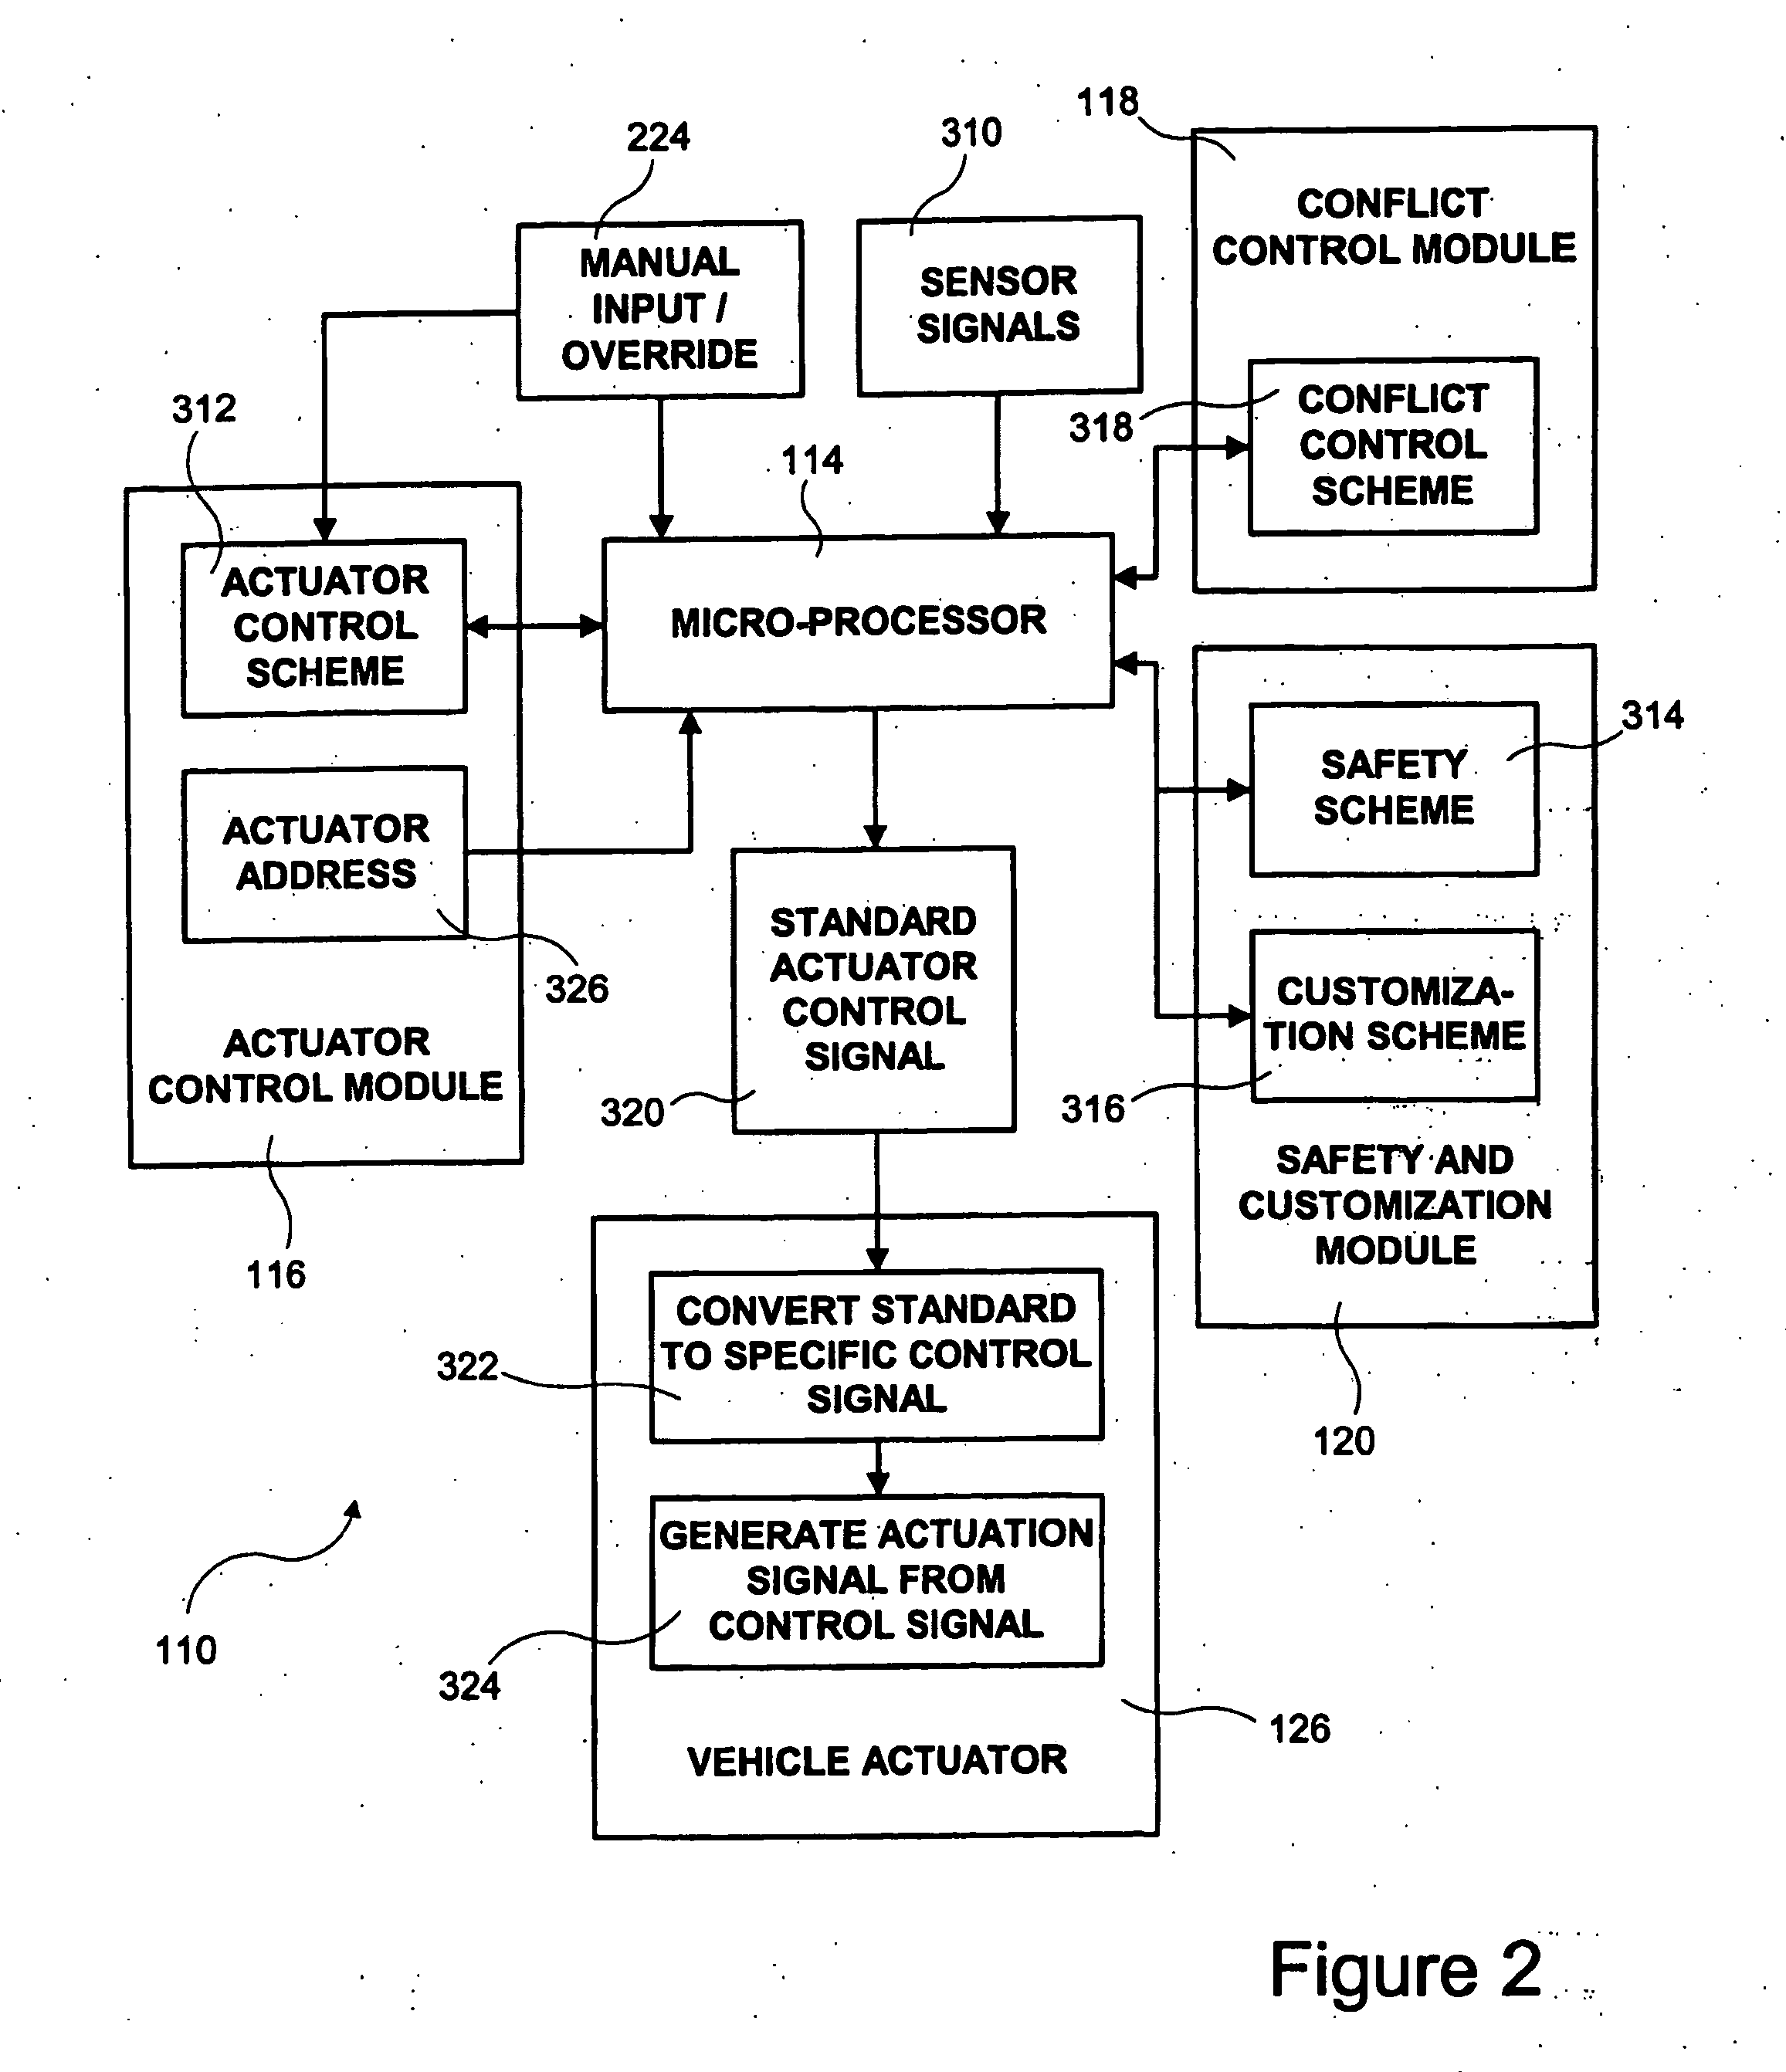 Central electronic control network for vehicle dynamics and ride control systems in heavy vehicles